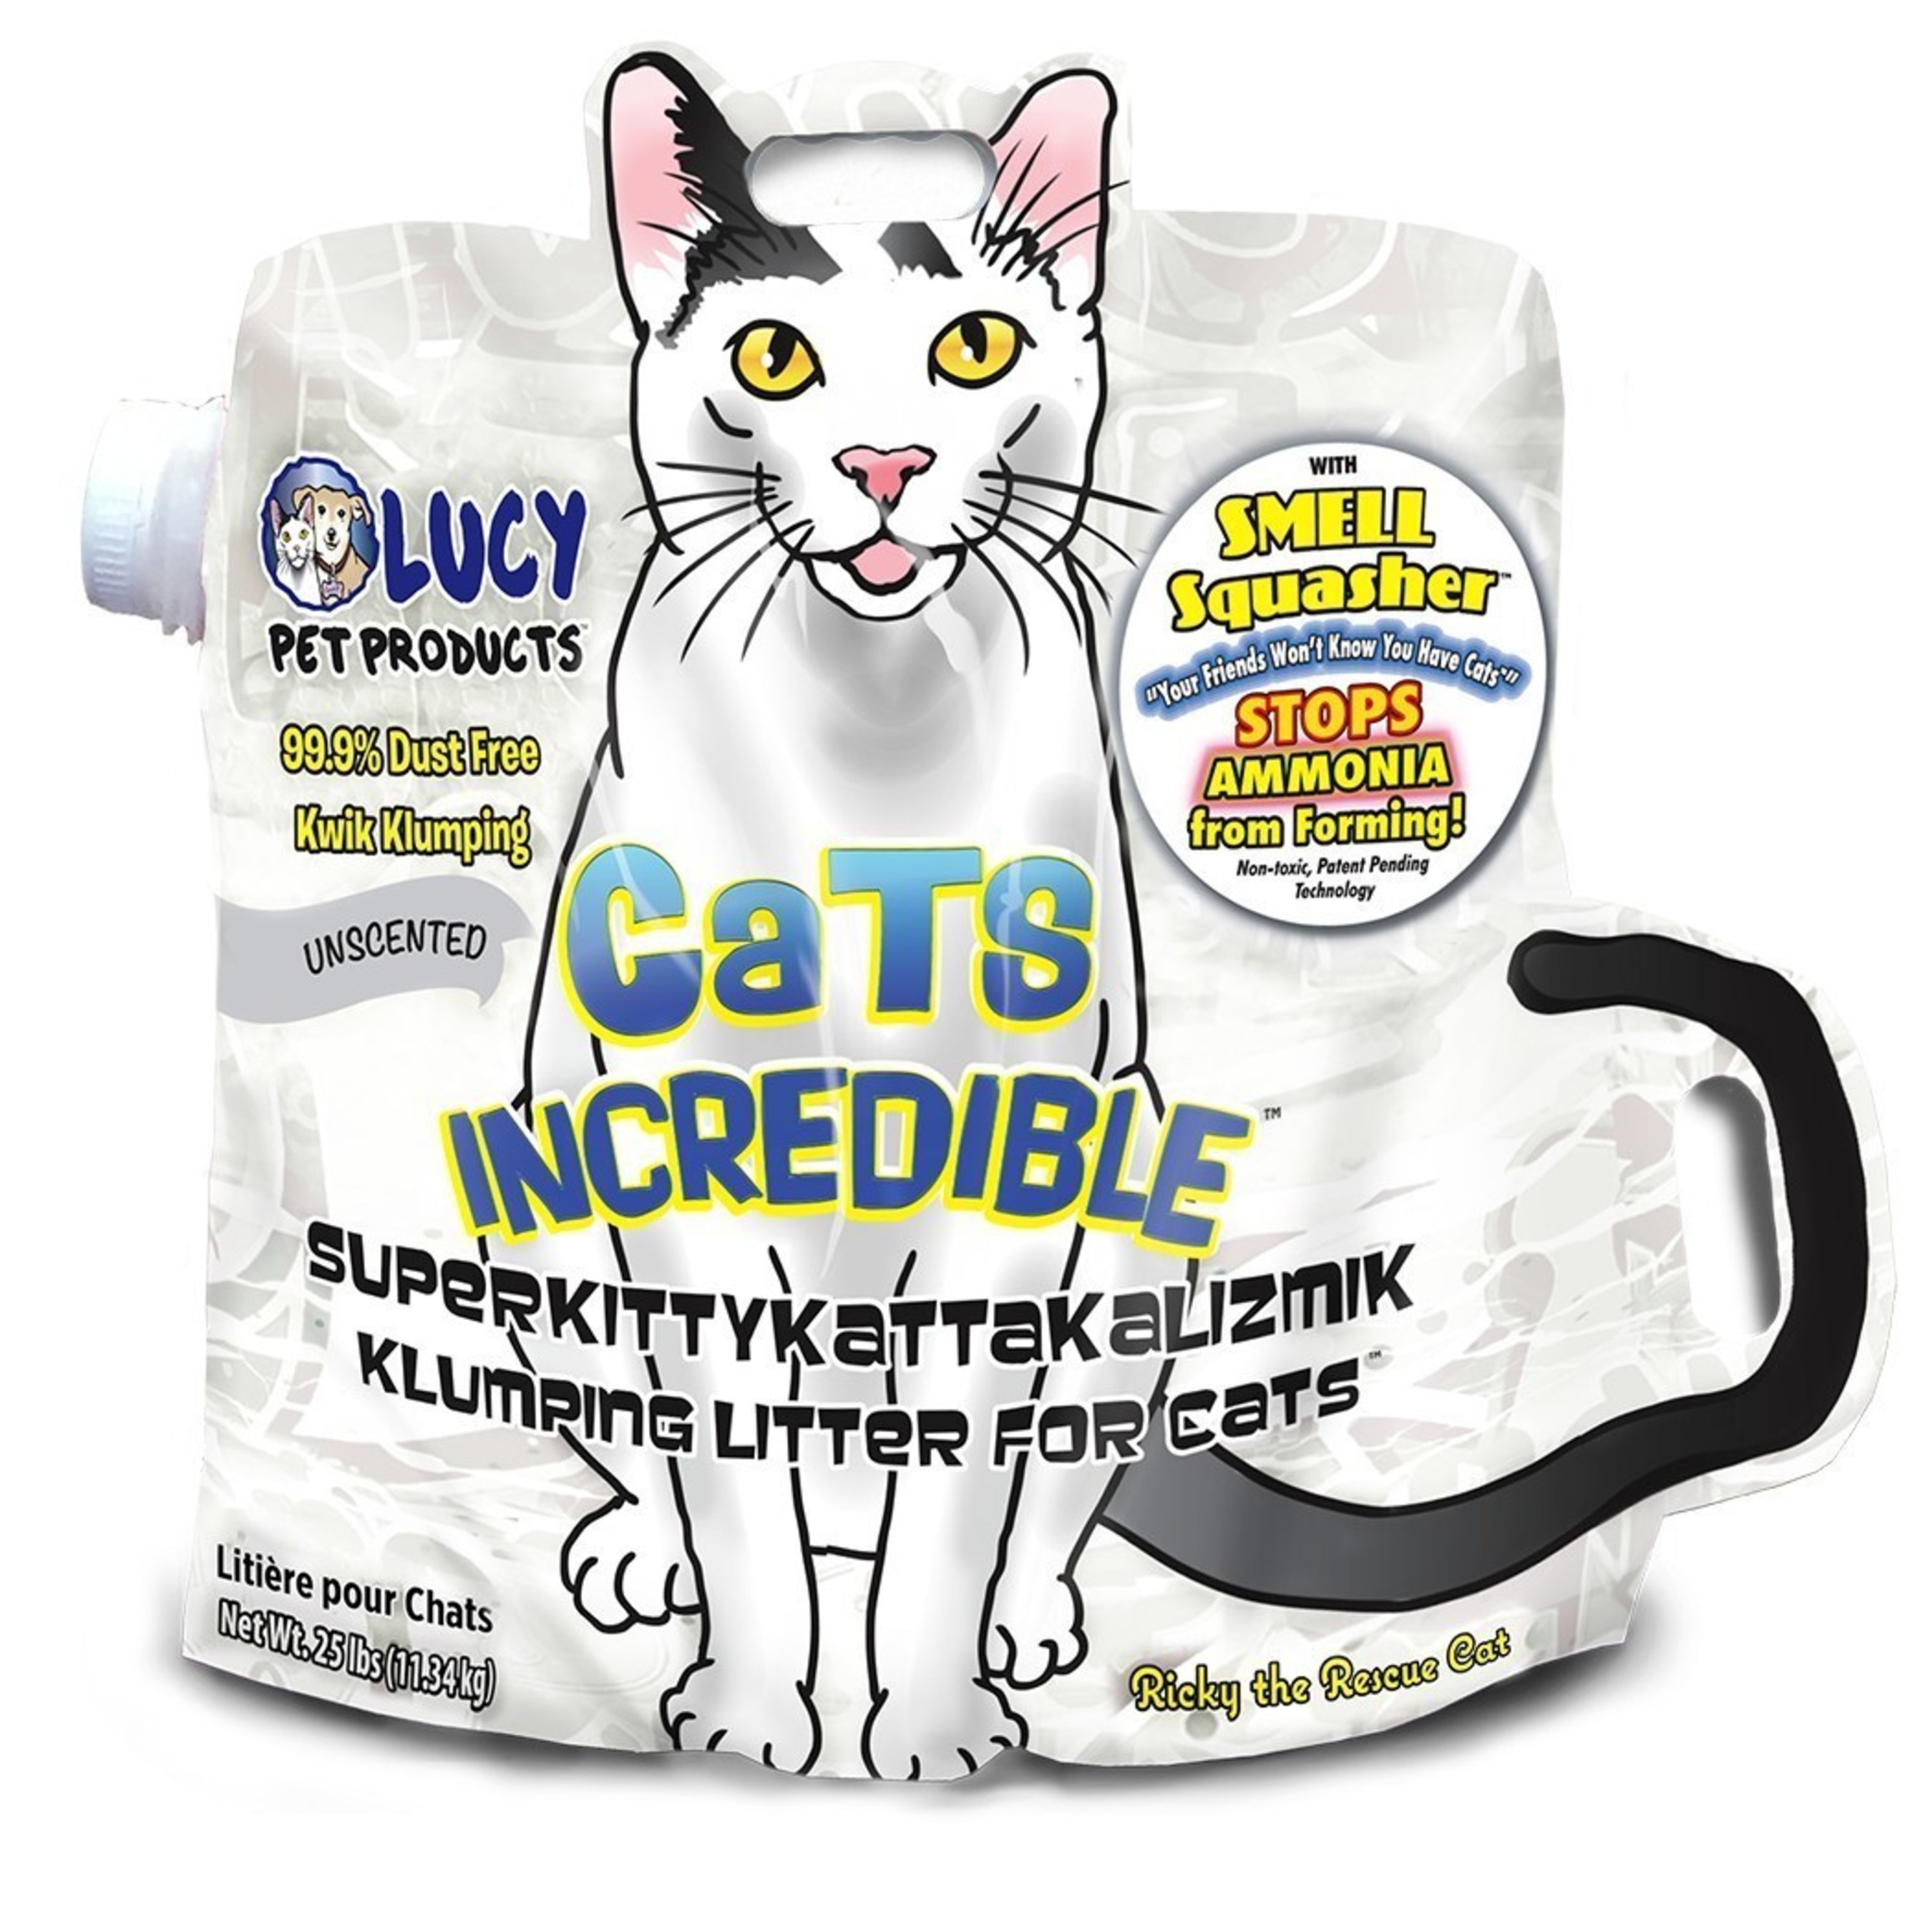 Cats Incredible litter in ergonomic, two-handled, cat shaped bag with side spout for easy pour.